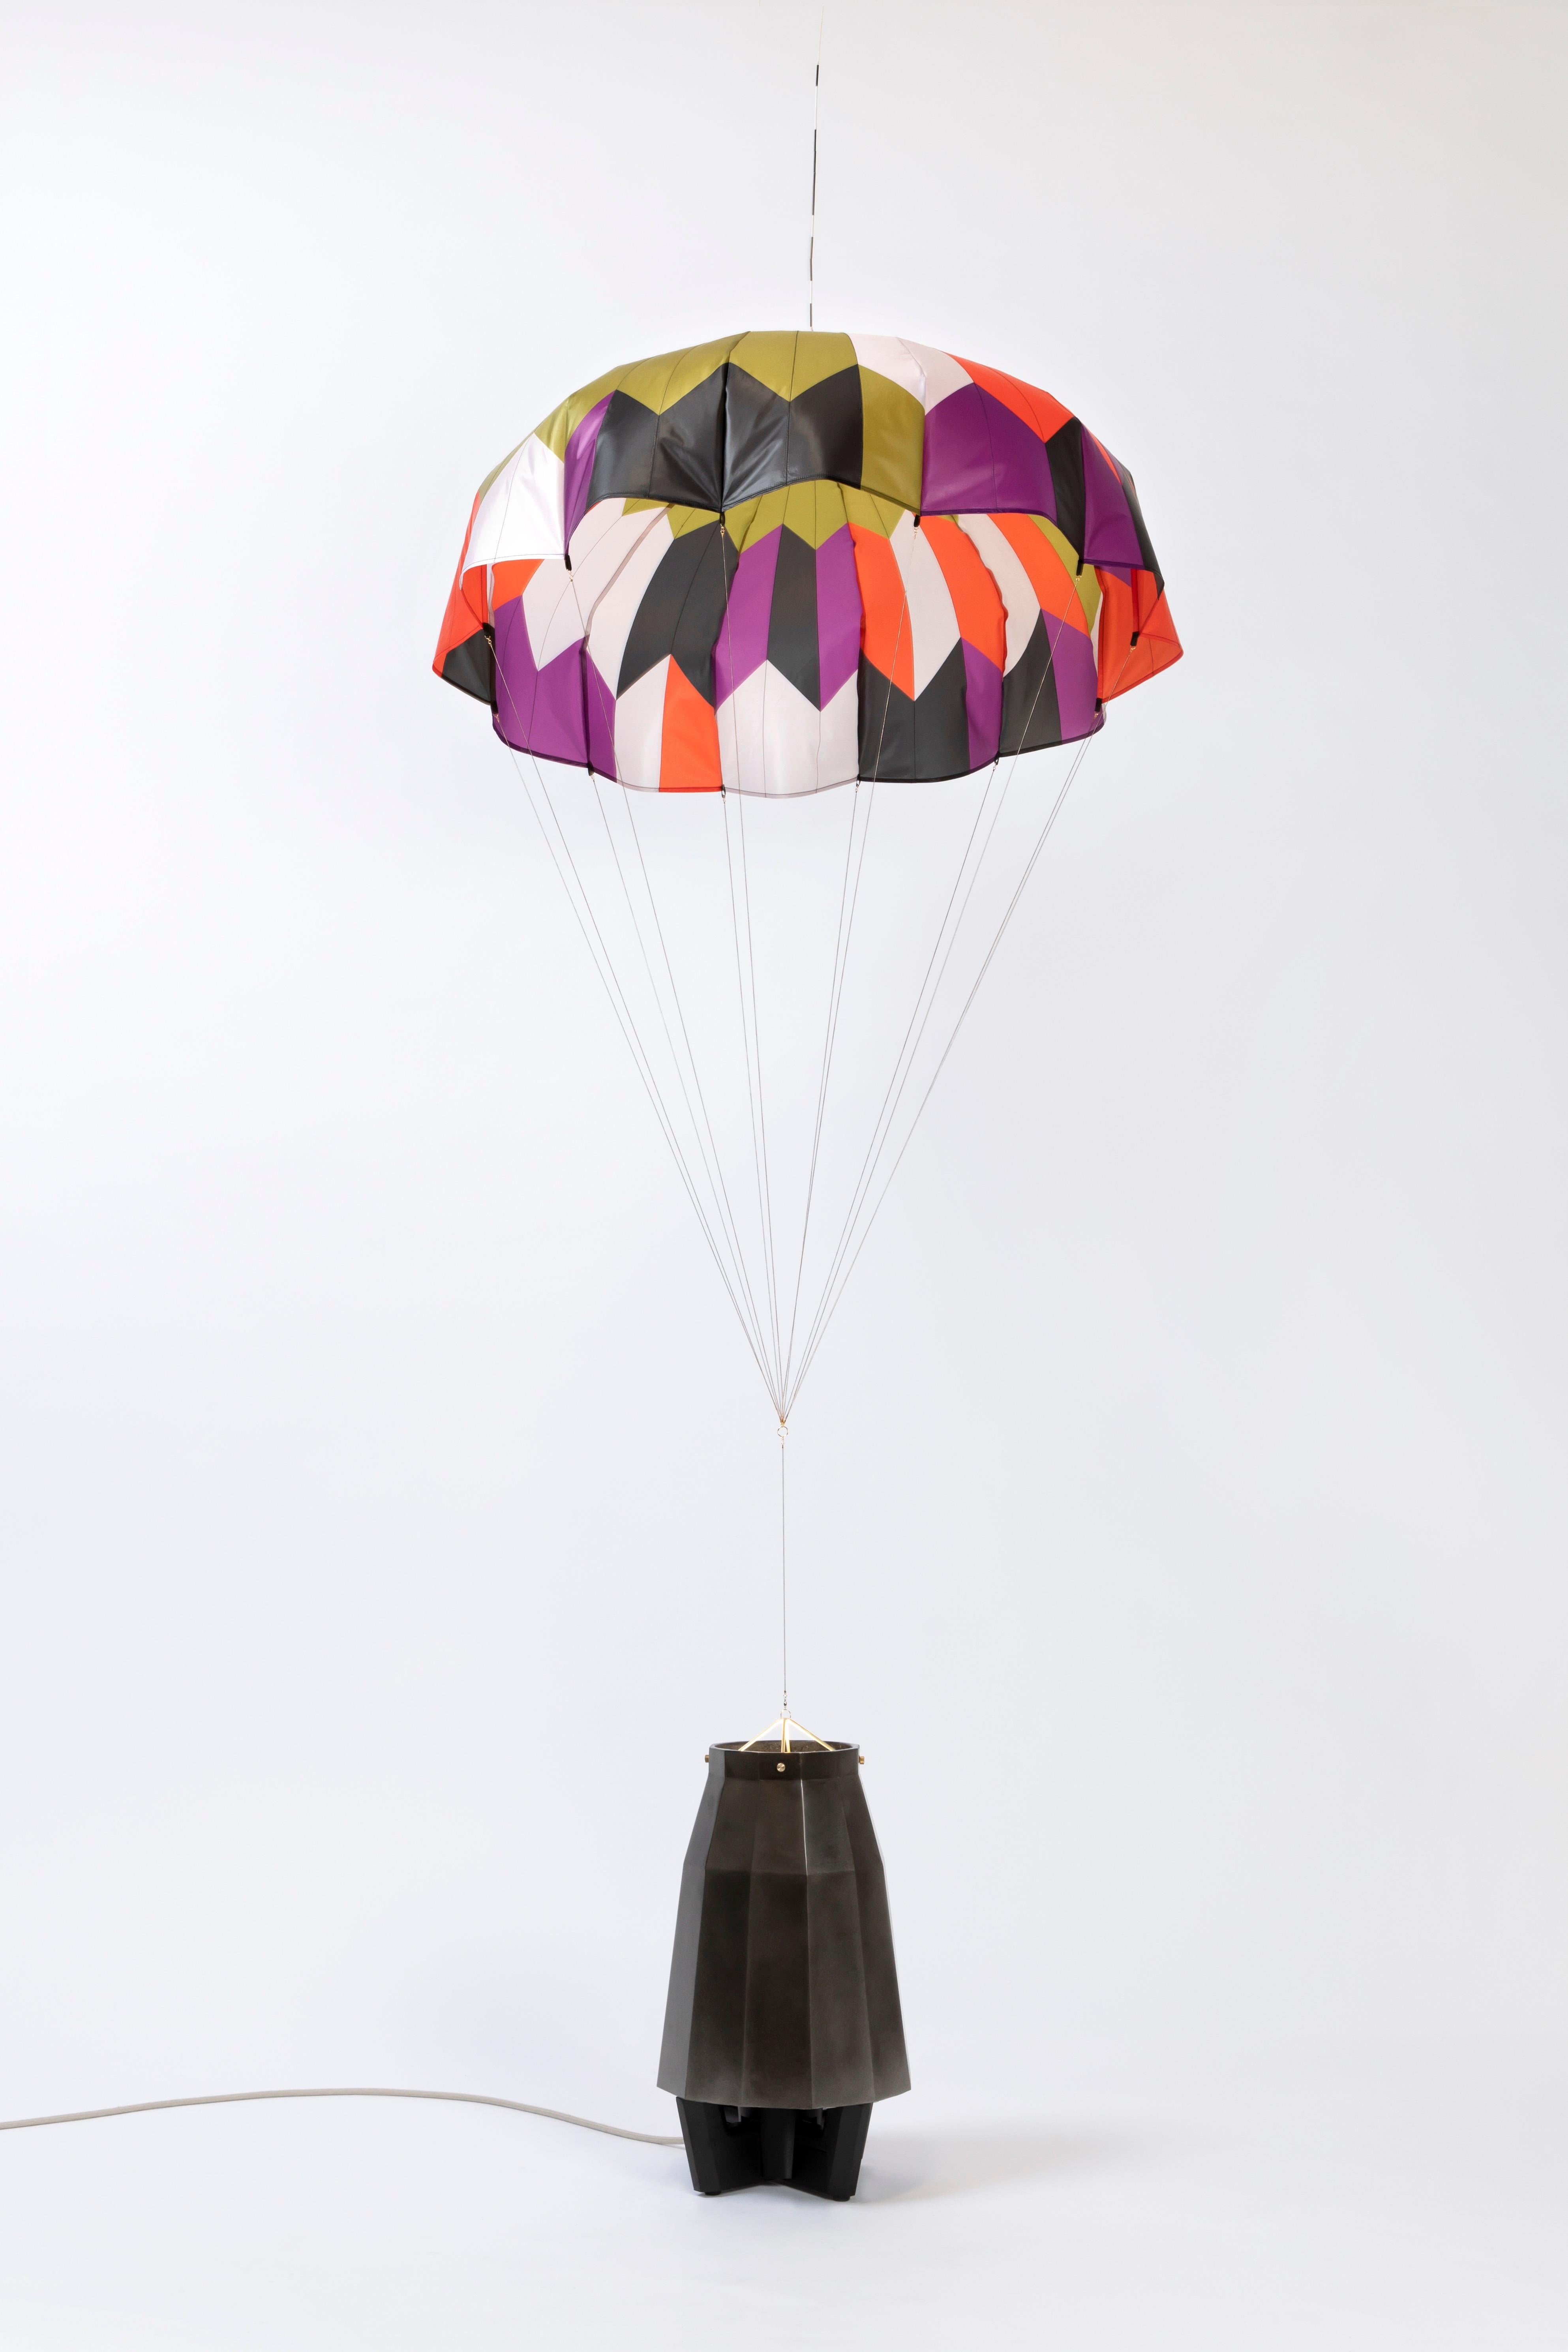 Unique and dynamic parachute lamp with a lacquered black aluminum base. A clever and engaging piece that enhances any space.

Additional Information:
From acclaimed lighting designer Bec Brittain, a new series of dynamic, whimsical lighting forms